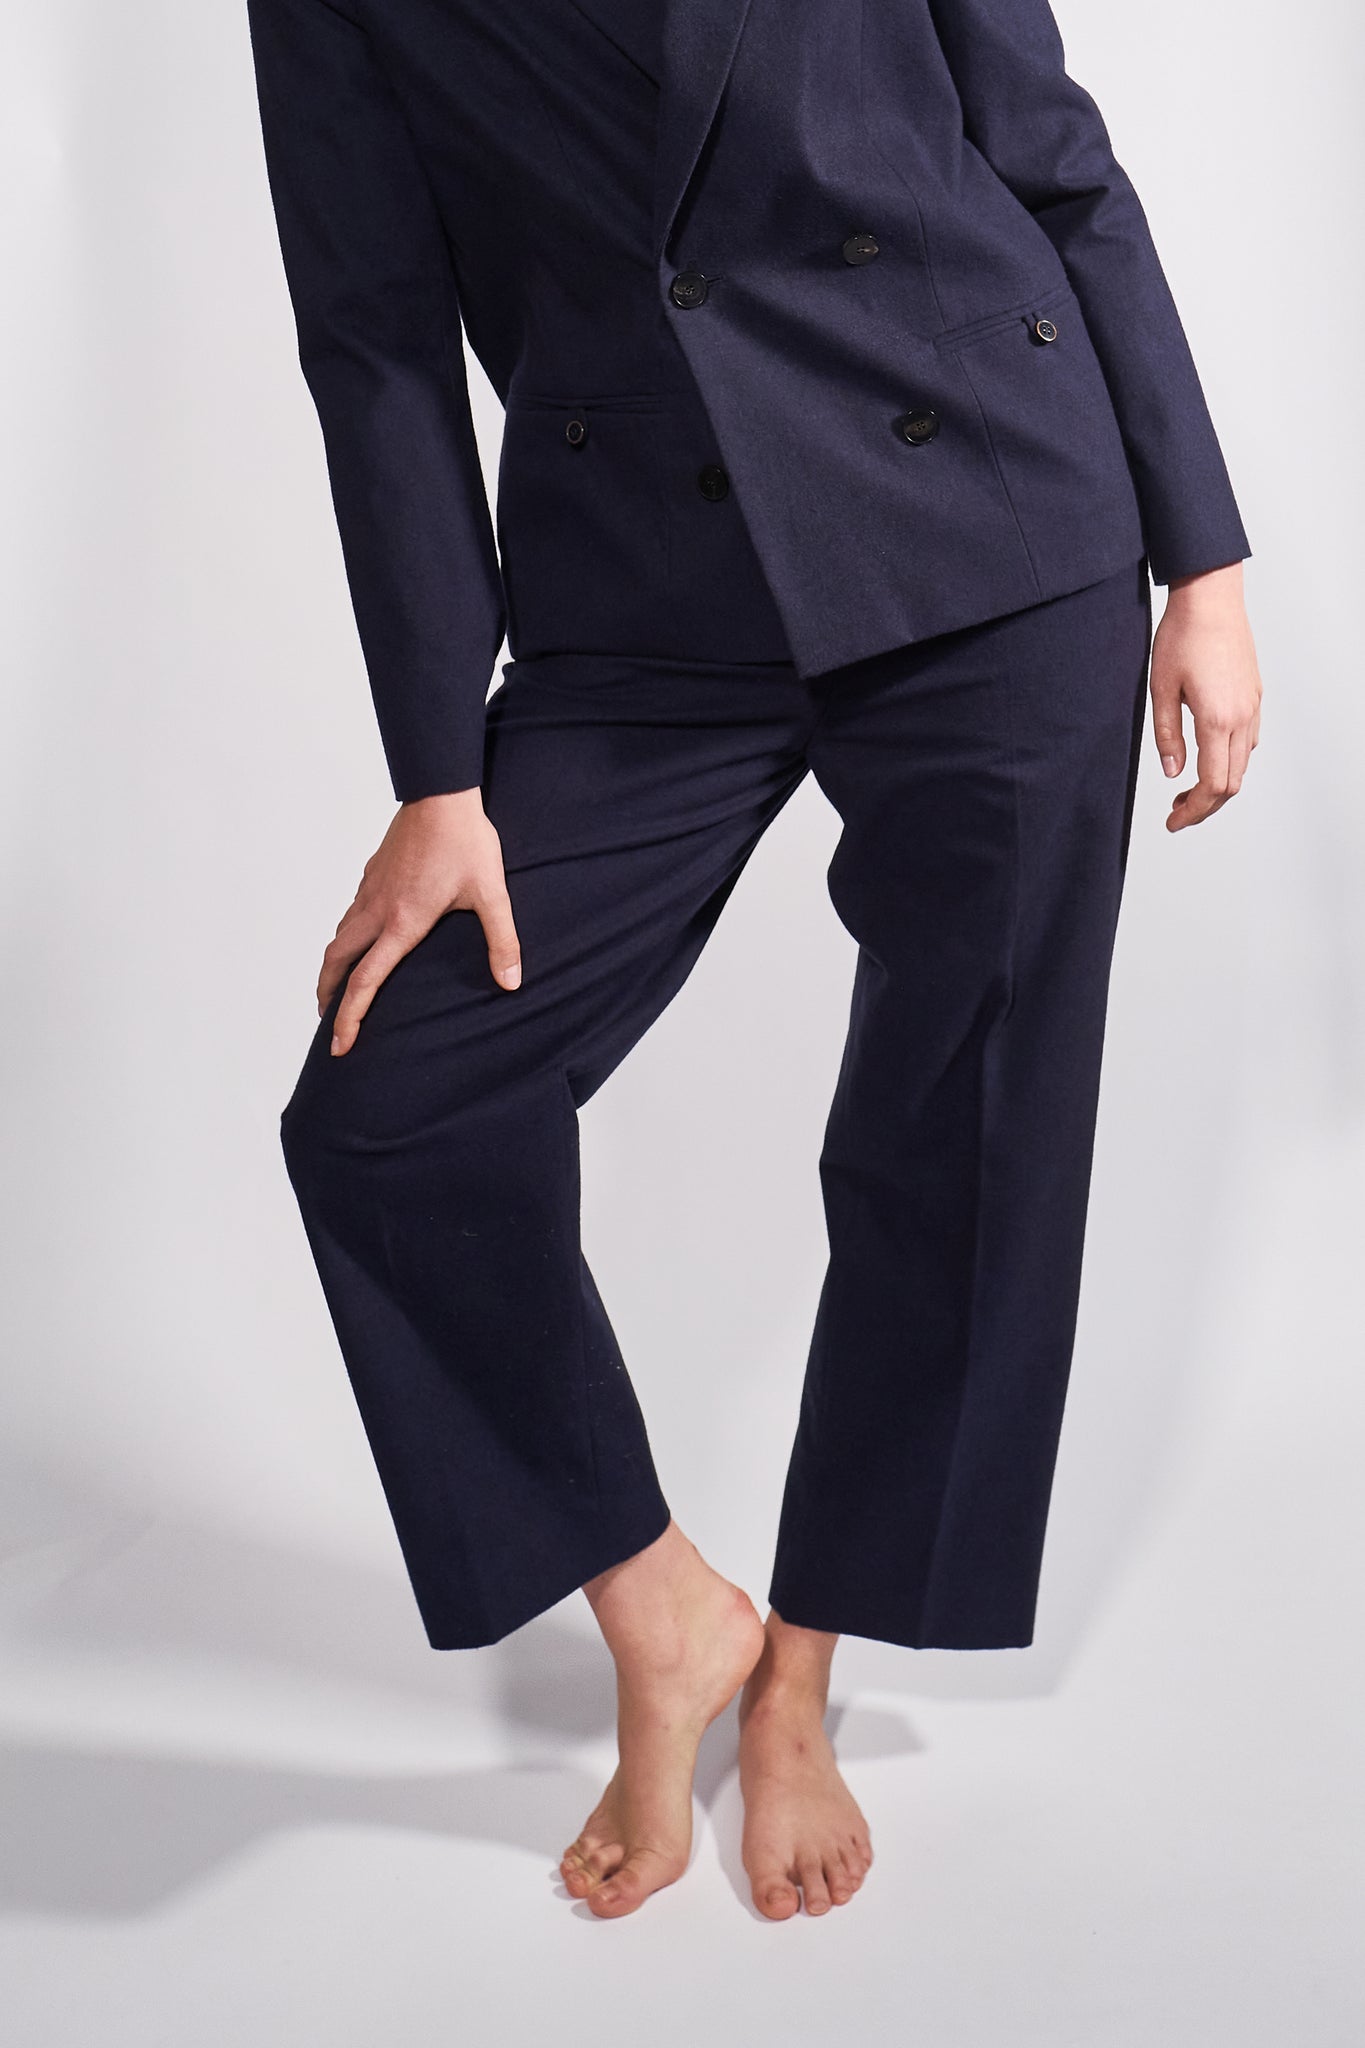 03/16 Mid-Waist Pants Navy female outfit - hello'ben store